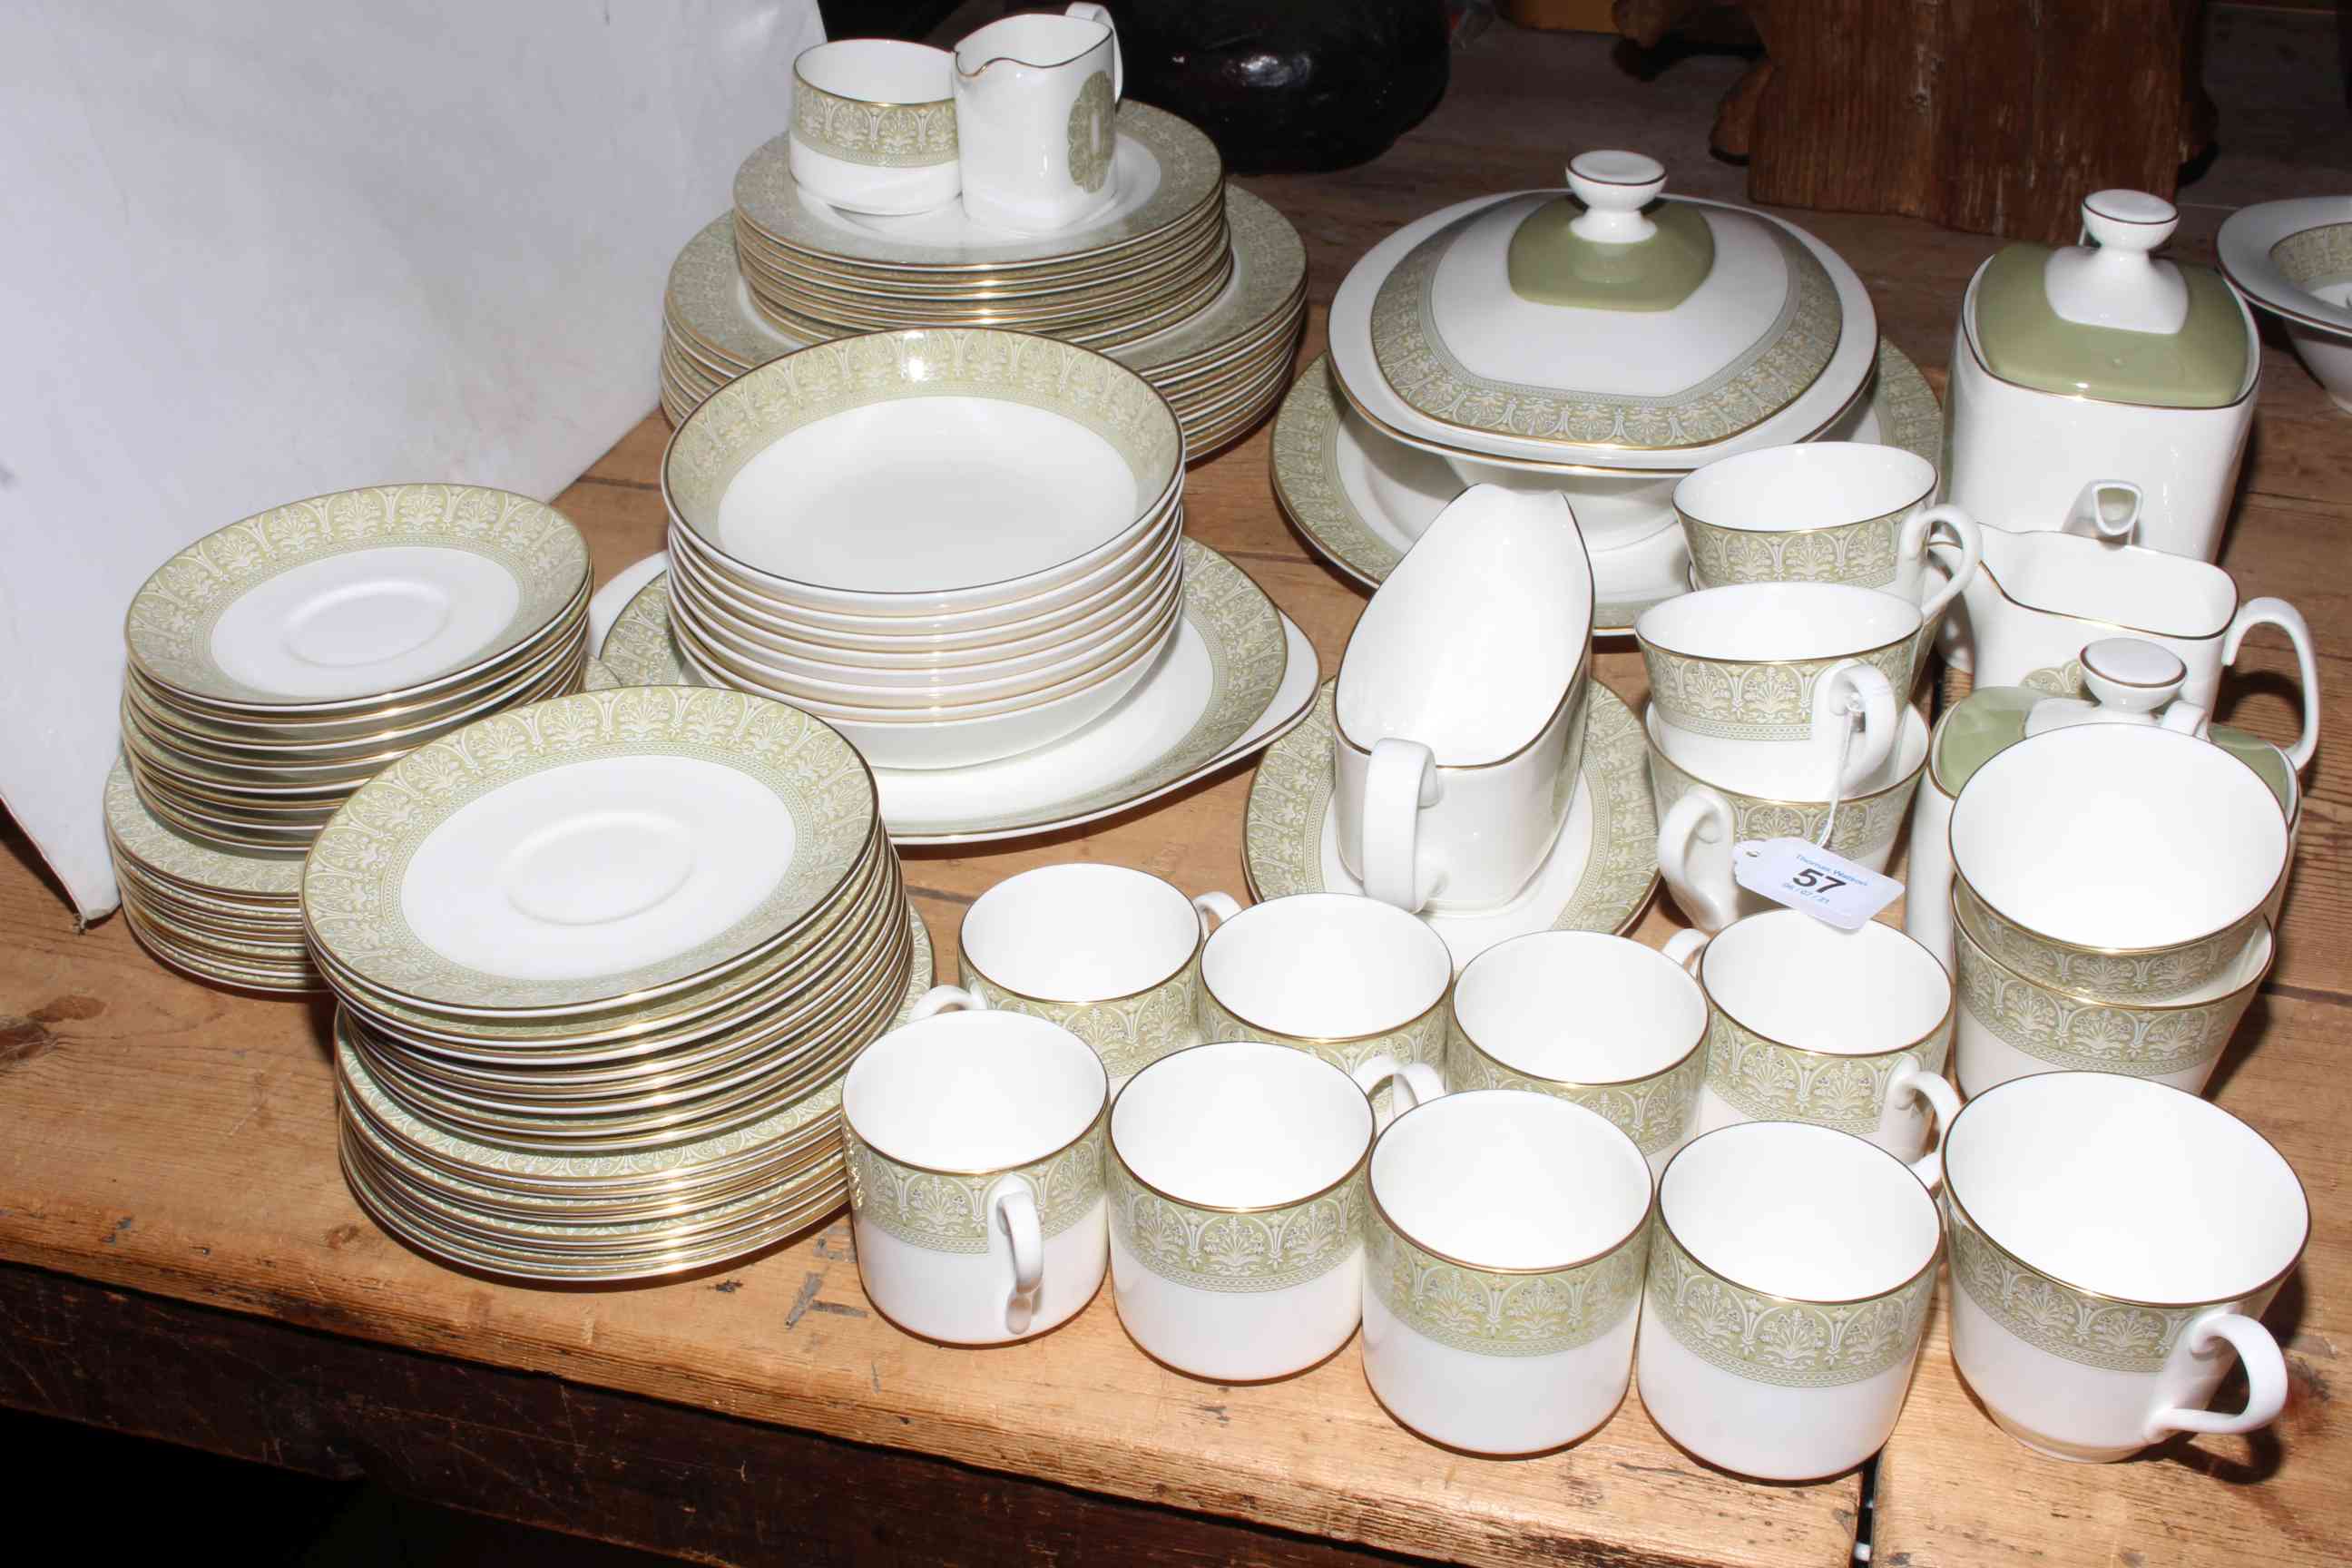 Royal Doulton 'Sonnet' dinner, tea and coffee wares, approximately eighty pieces.